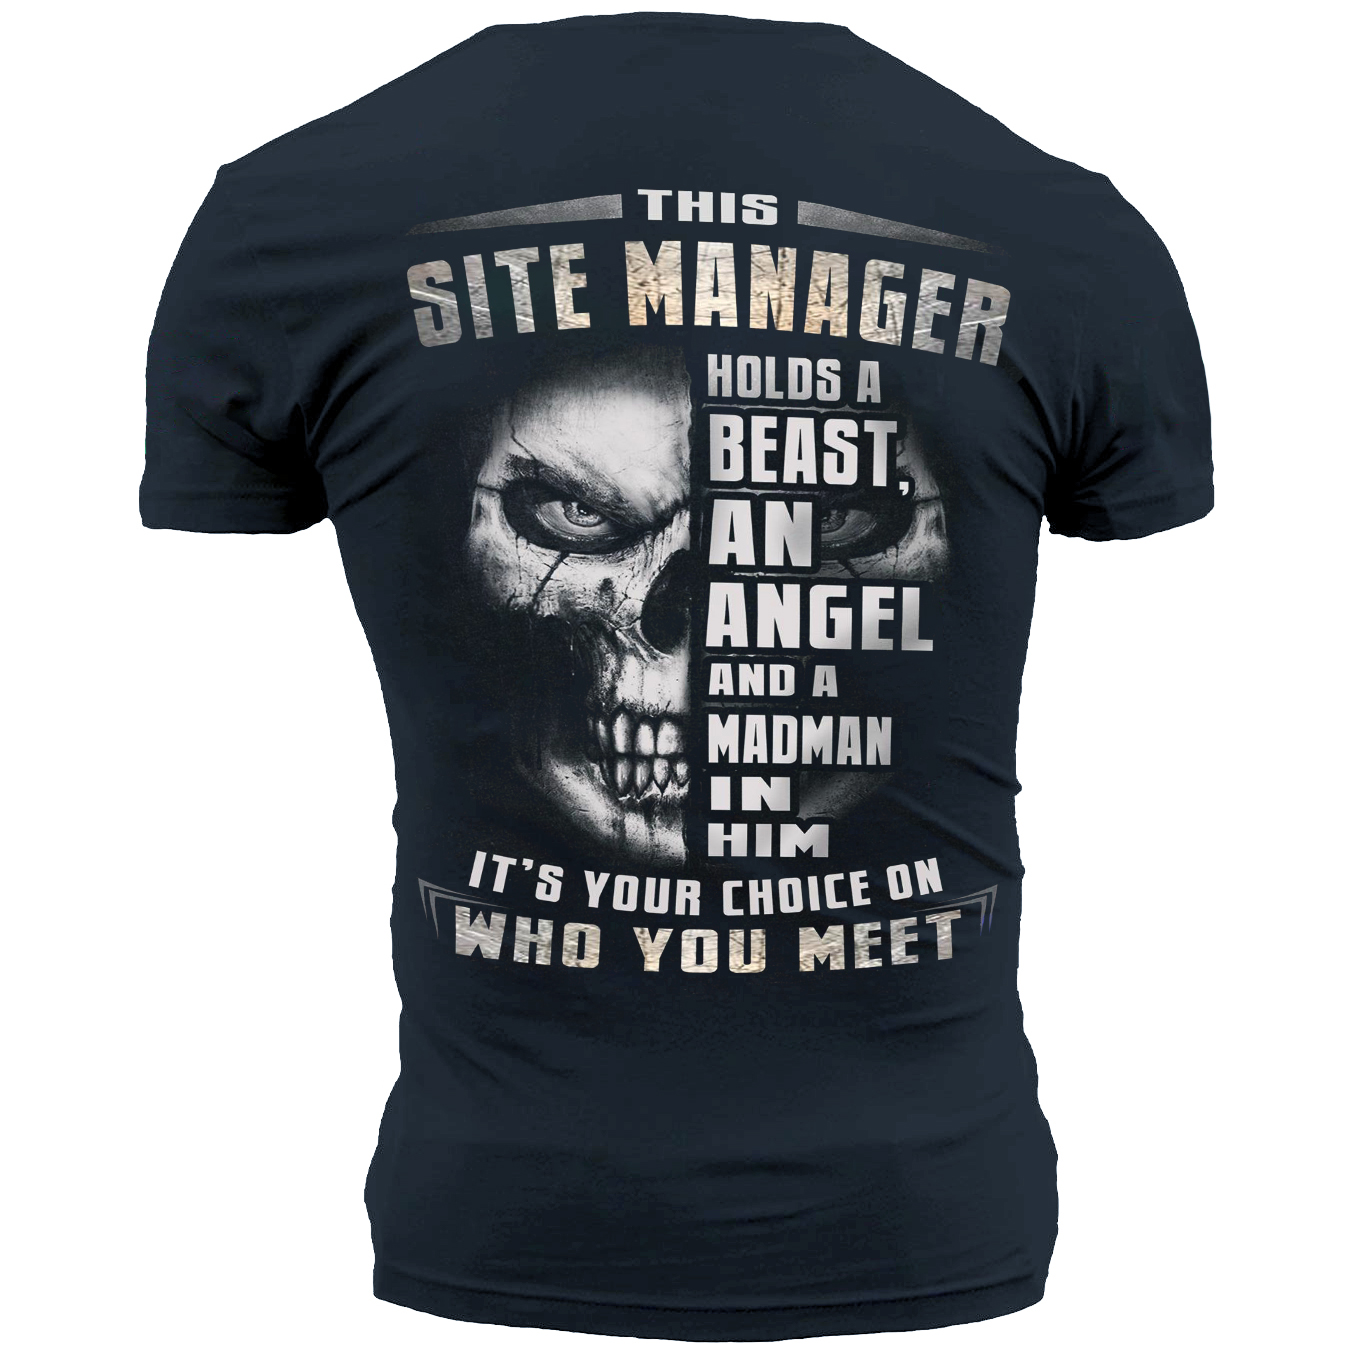 This Site Manager Holds Chic A Beast An Angel And A Madman In Him It's Your Choice On Who You Meet T-shirt